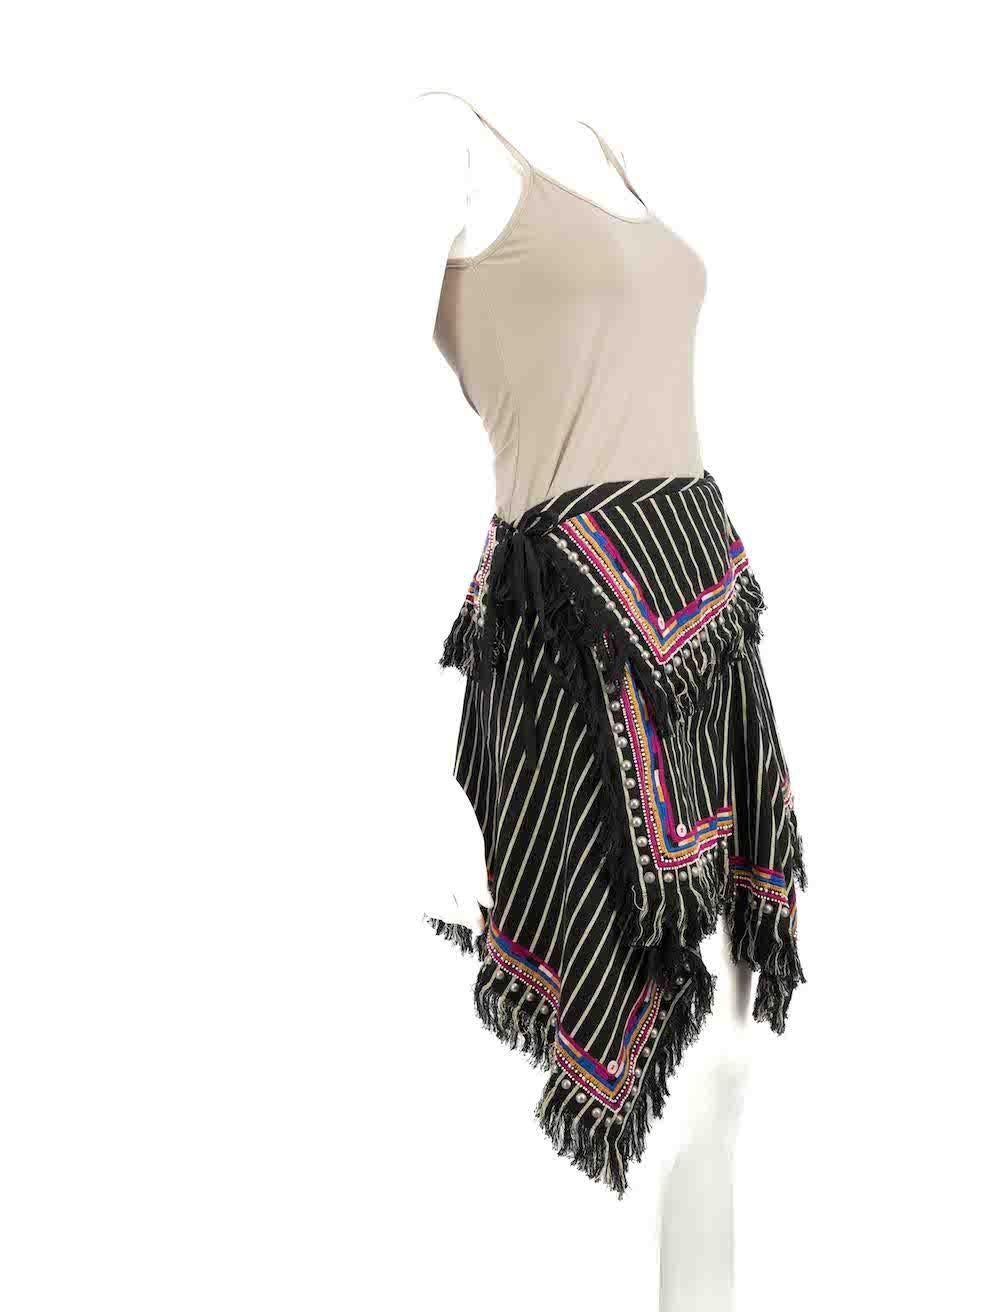 CONDITION is Never worn, with tags. No visible wear to skirt is evident on this new Isabel Marant designer resale item.
 
 Details
 Black
 Cotton
 Wrap skirt
 Striped pattern
 Fringe hem
 Button and tie fastening
 Silver studded
 
 
 Made in India
